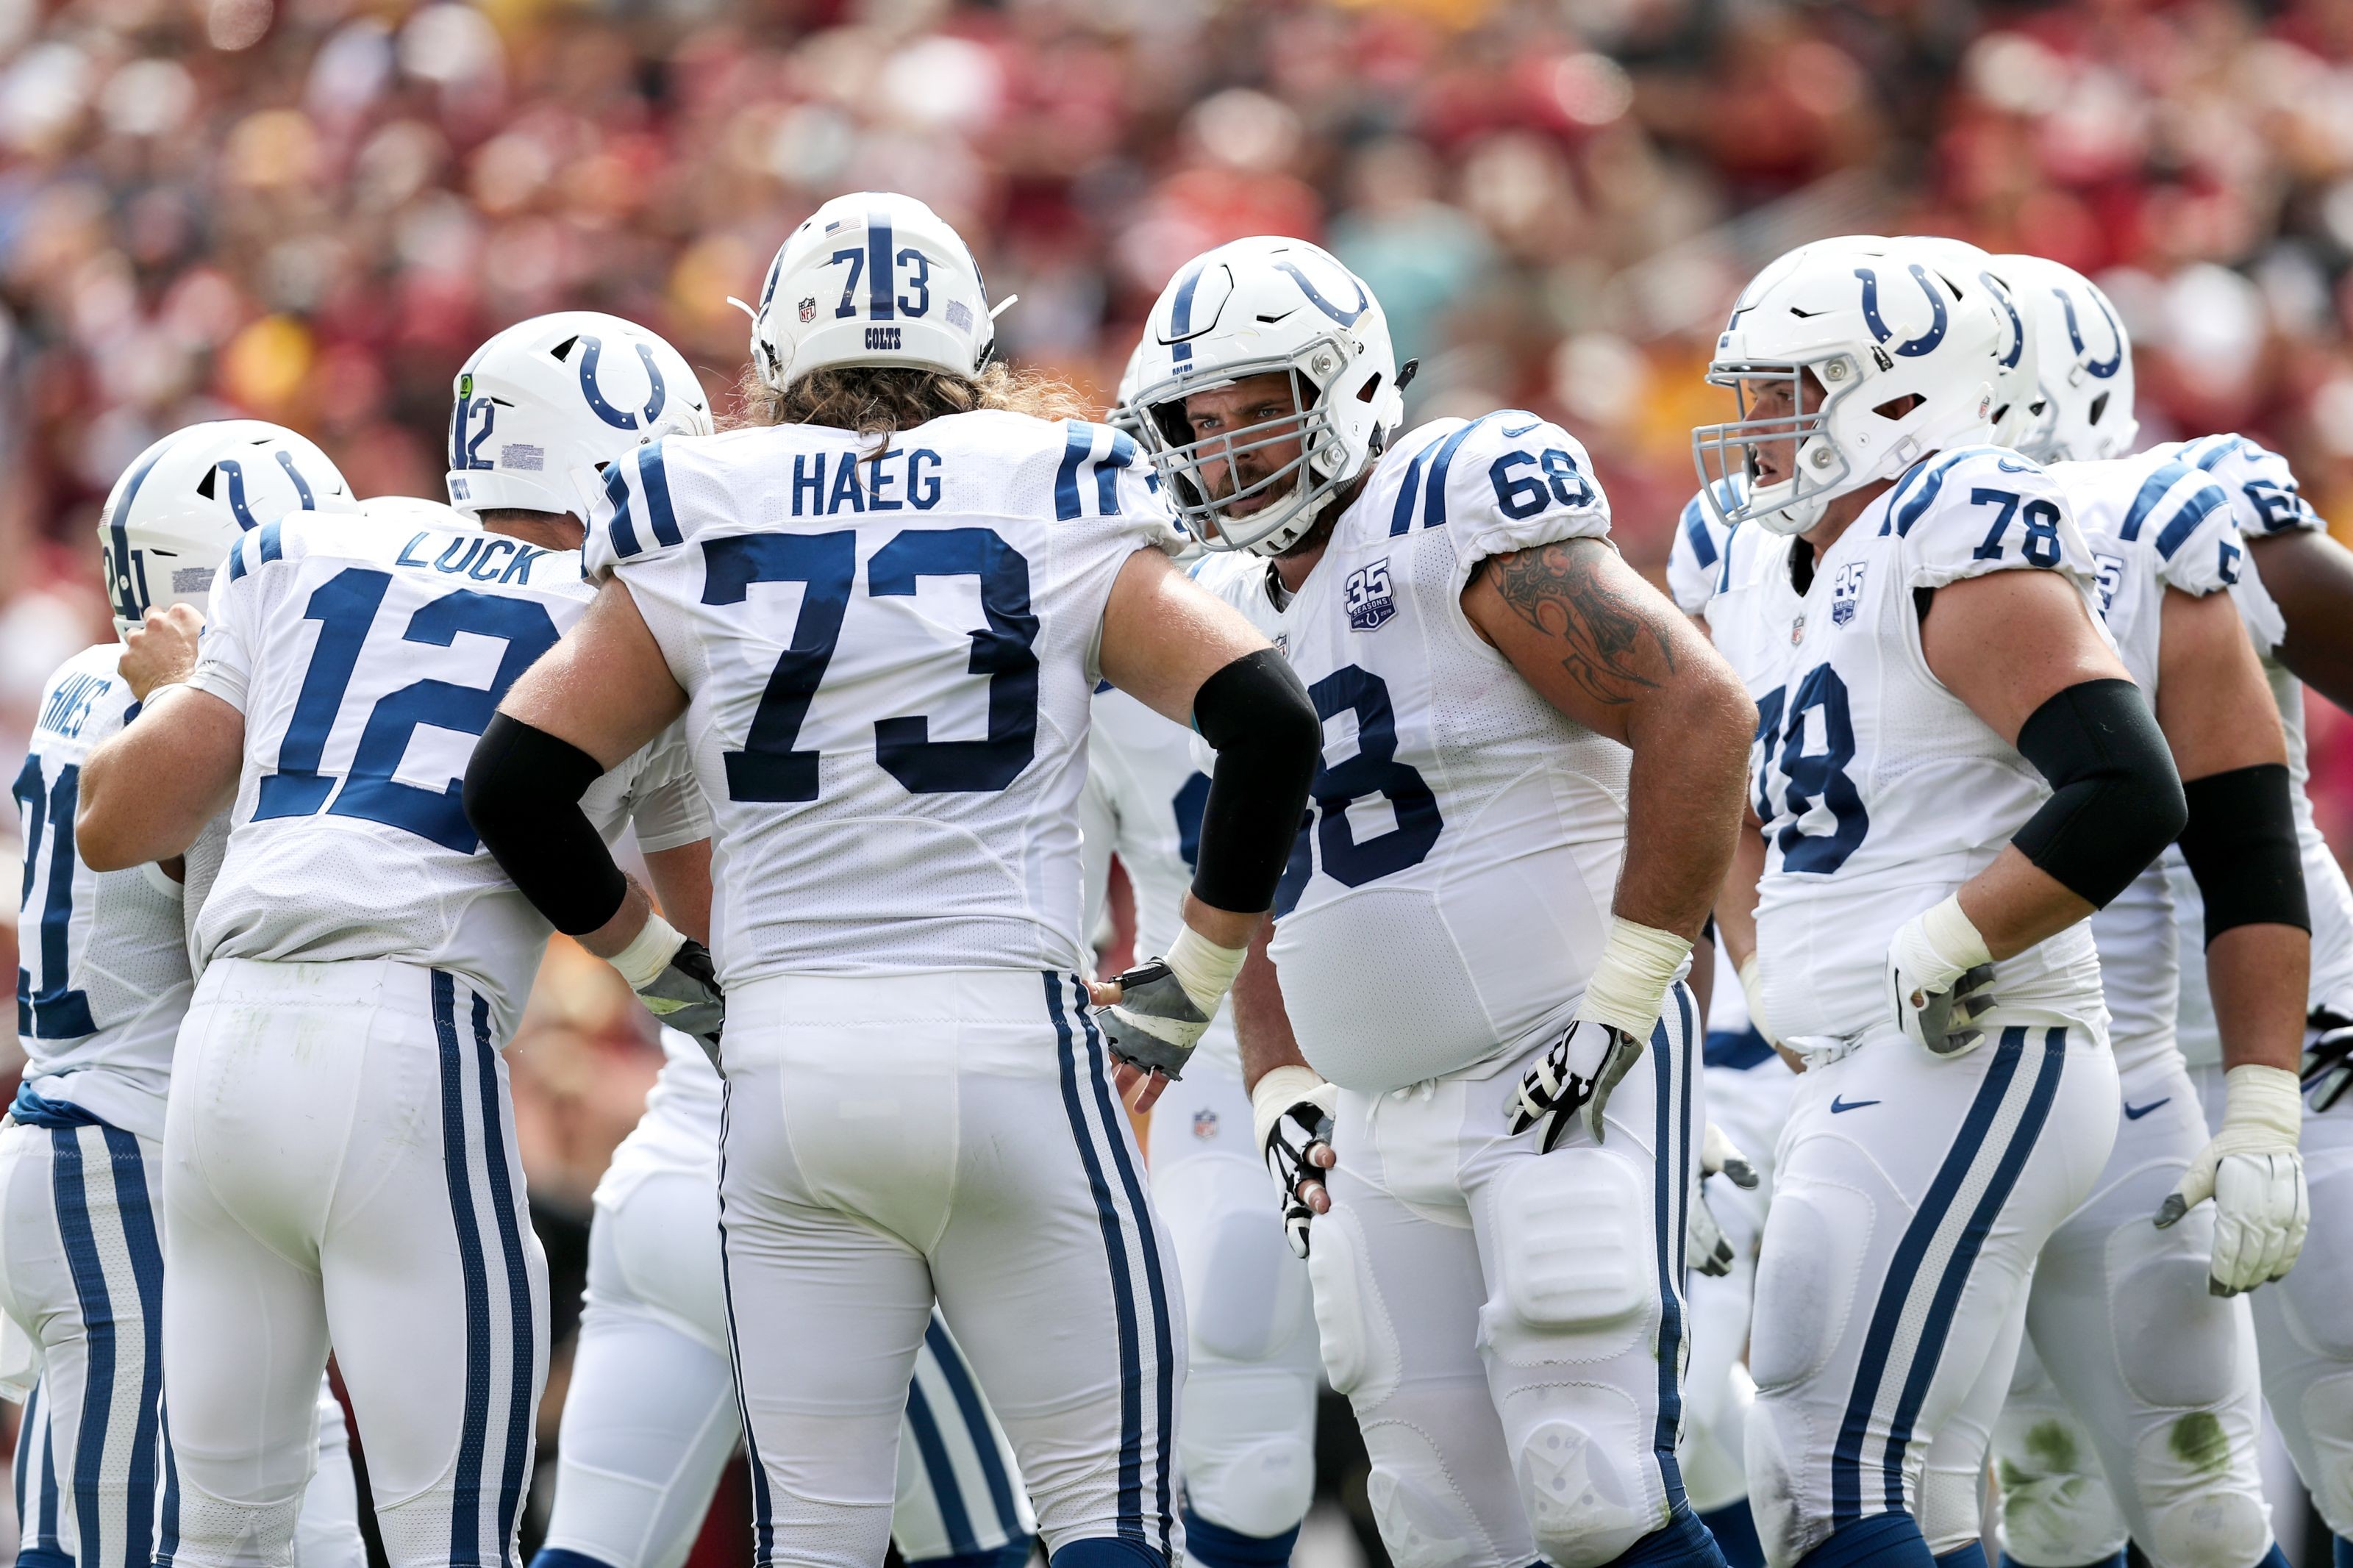 Has the Colts offensive line finally turned the corner?